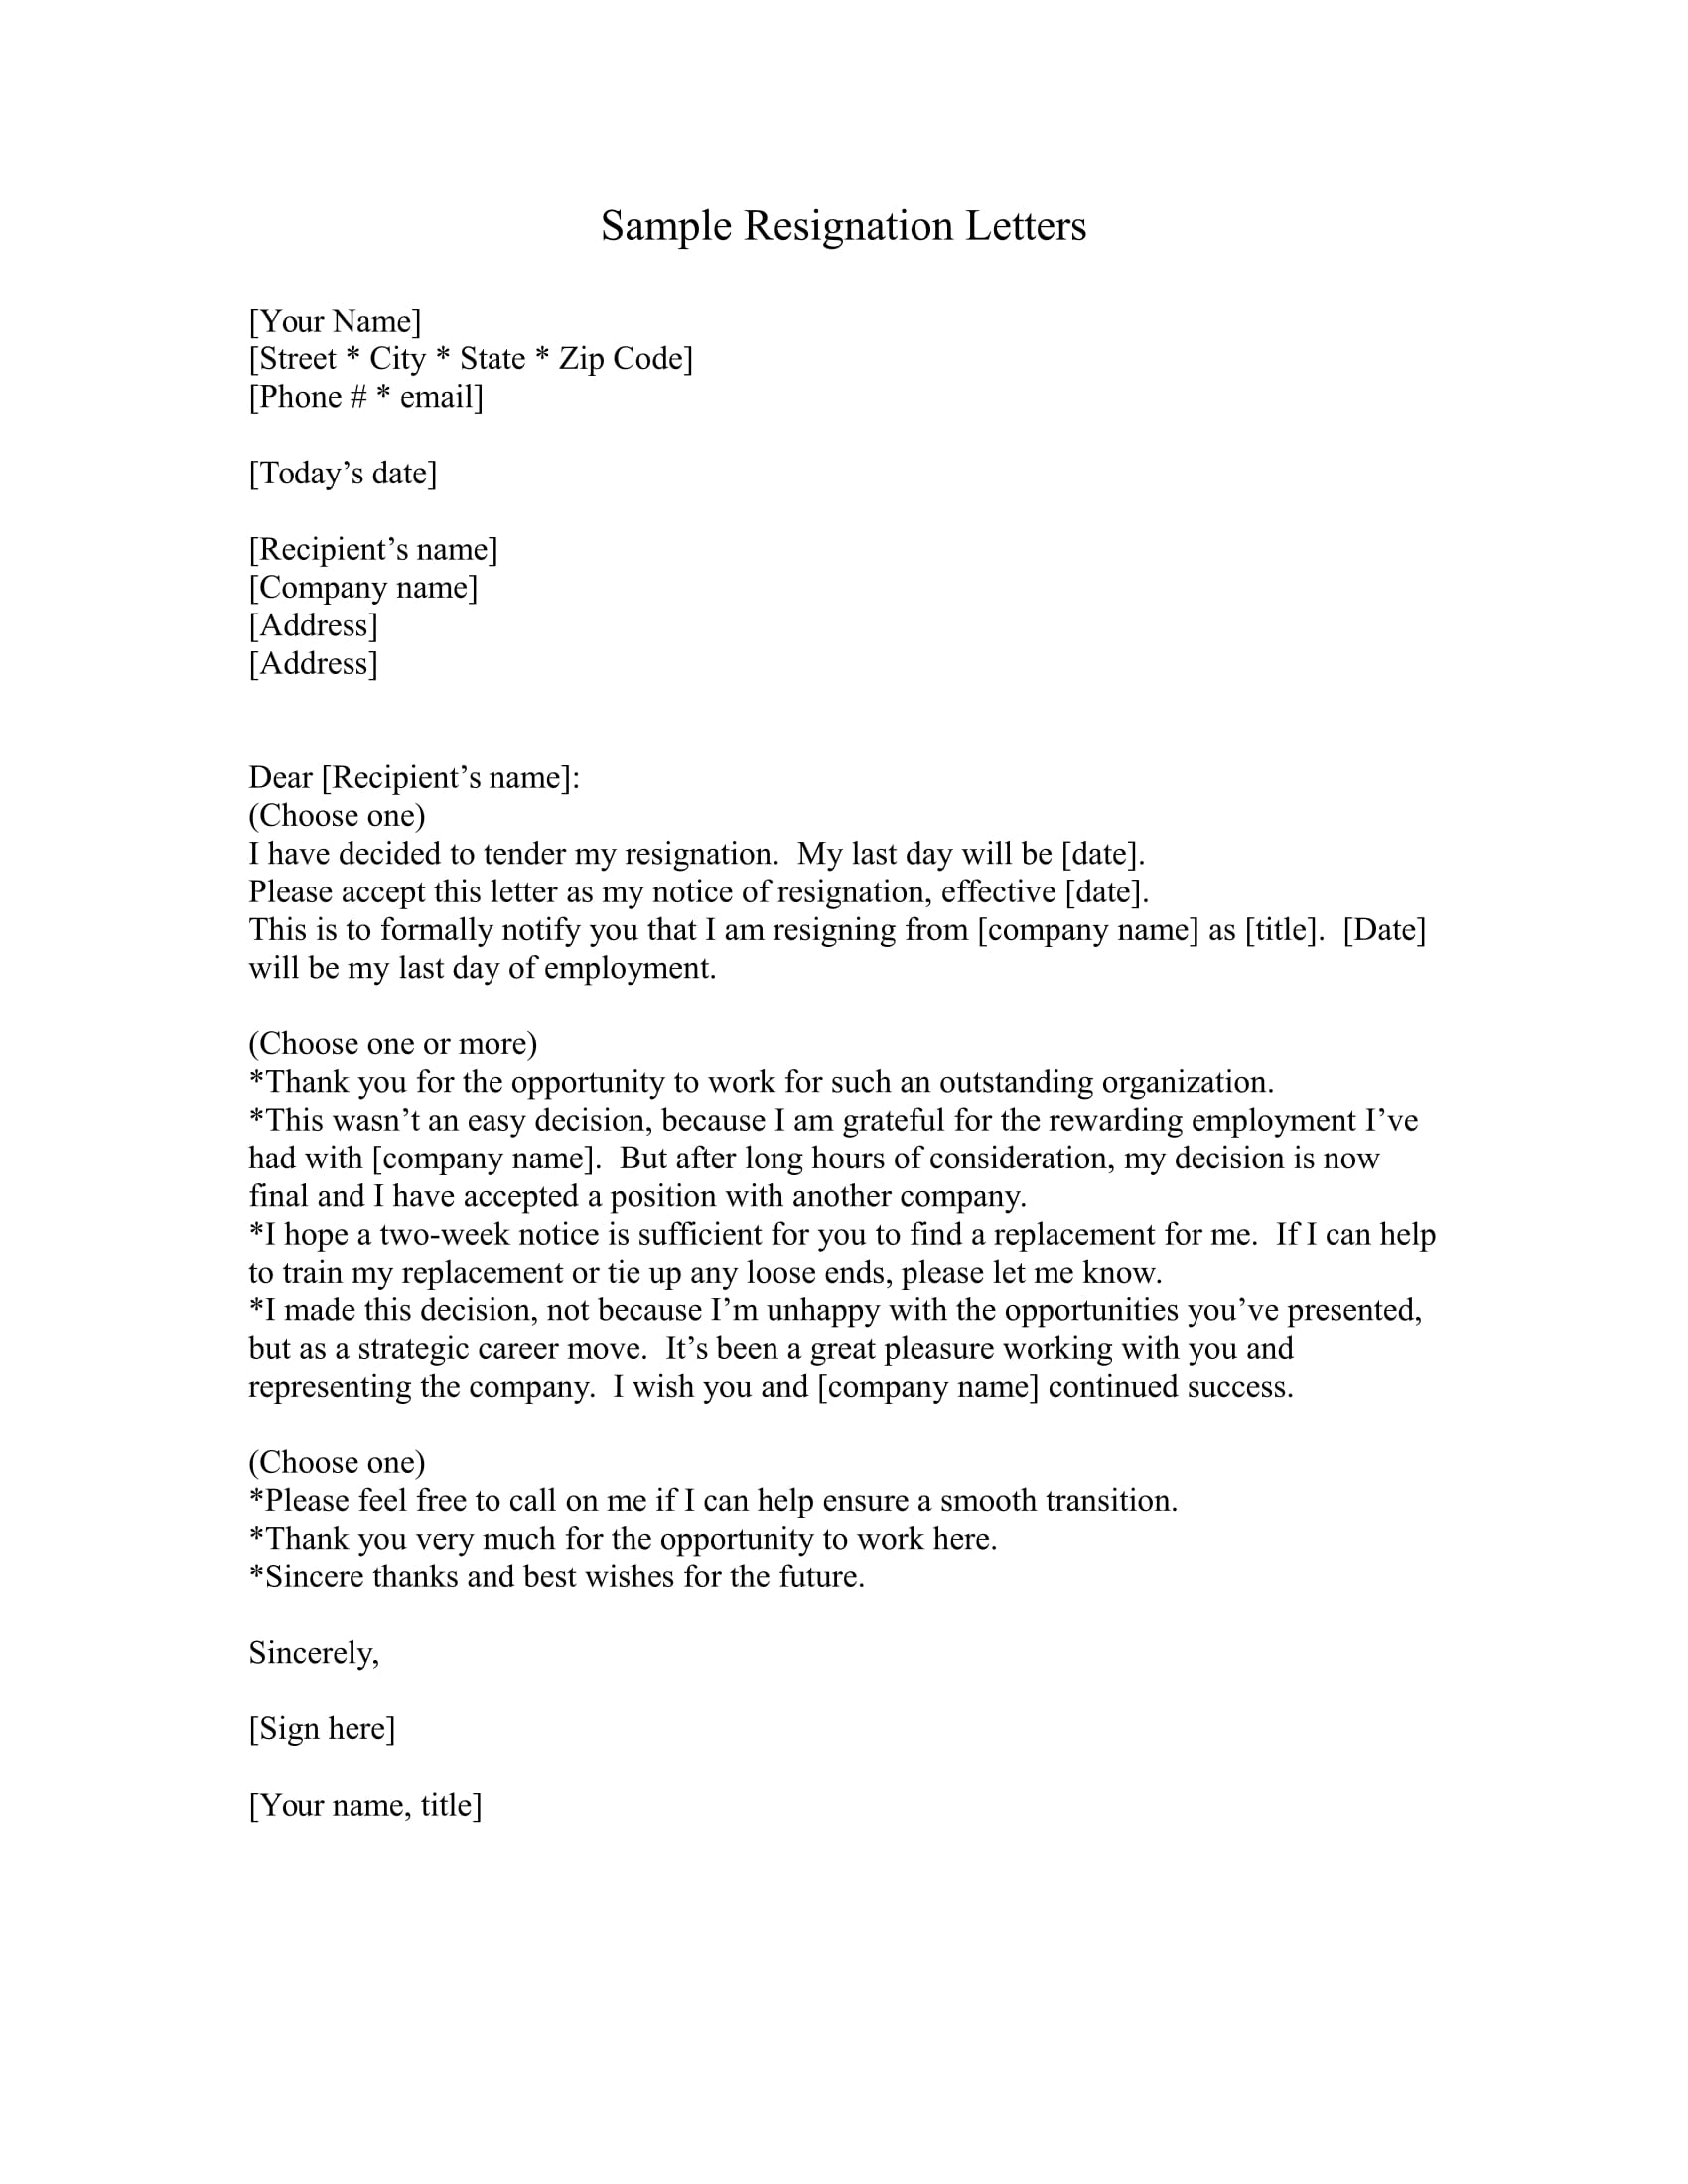 Free Resignation Letter To Print from images.examples.com